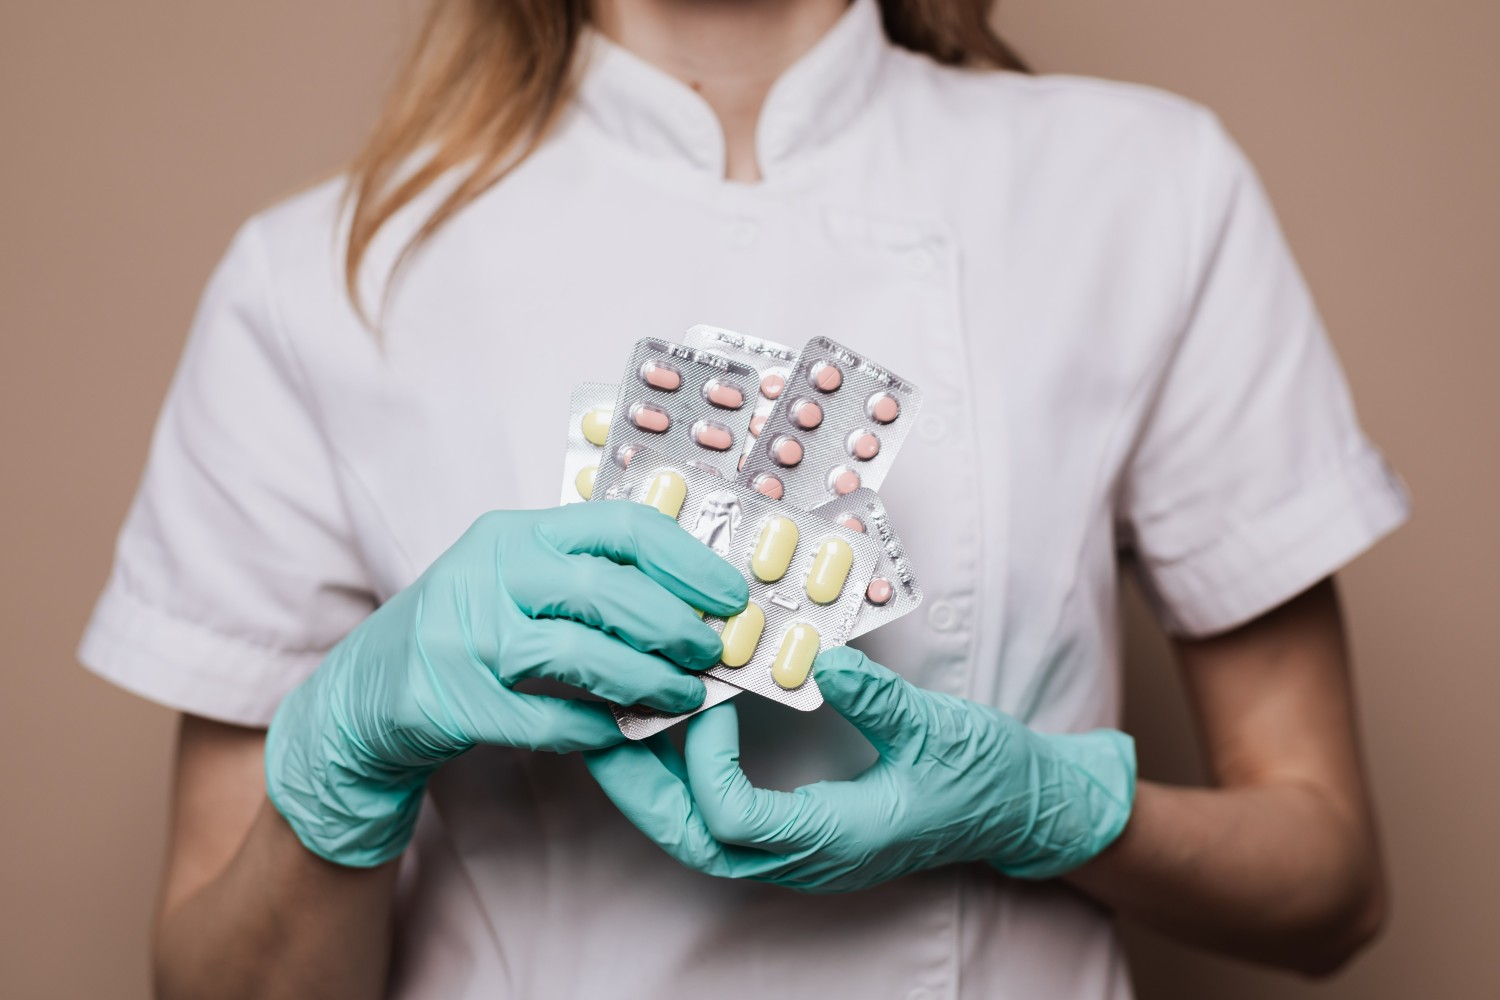 A person holding medications